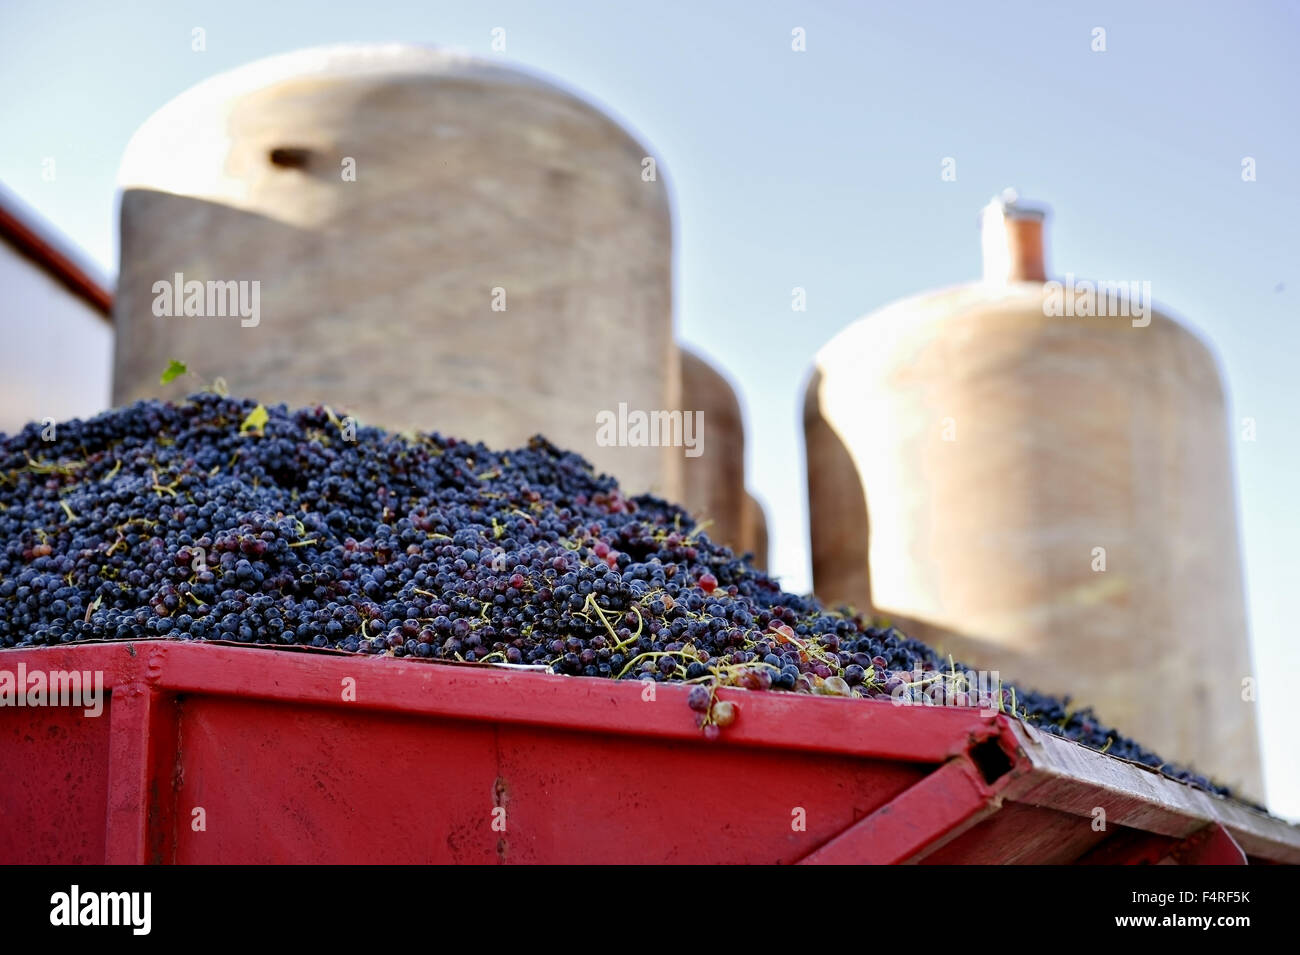 Heap of barely harvested red grapes with industrial fermentation tanks in background Stock Photo